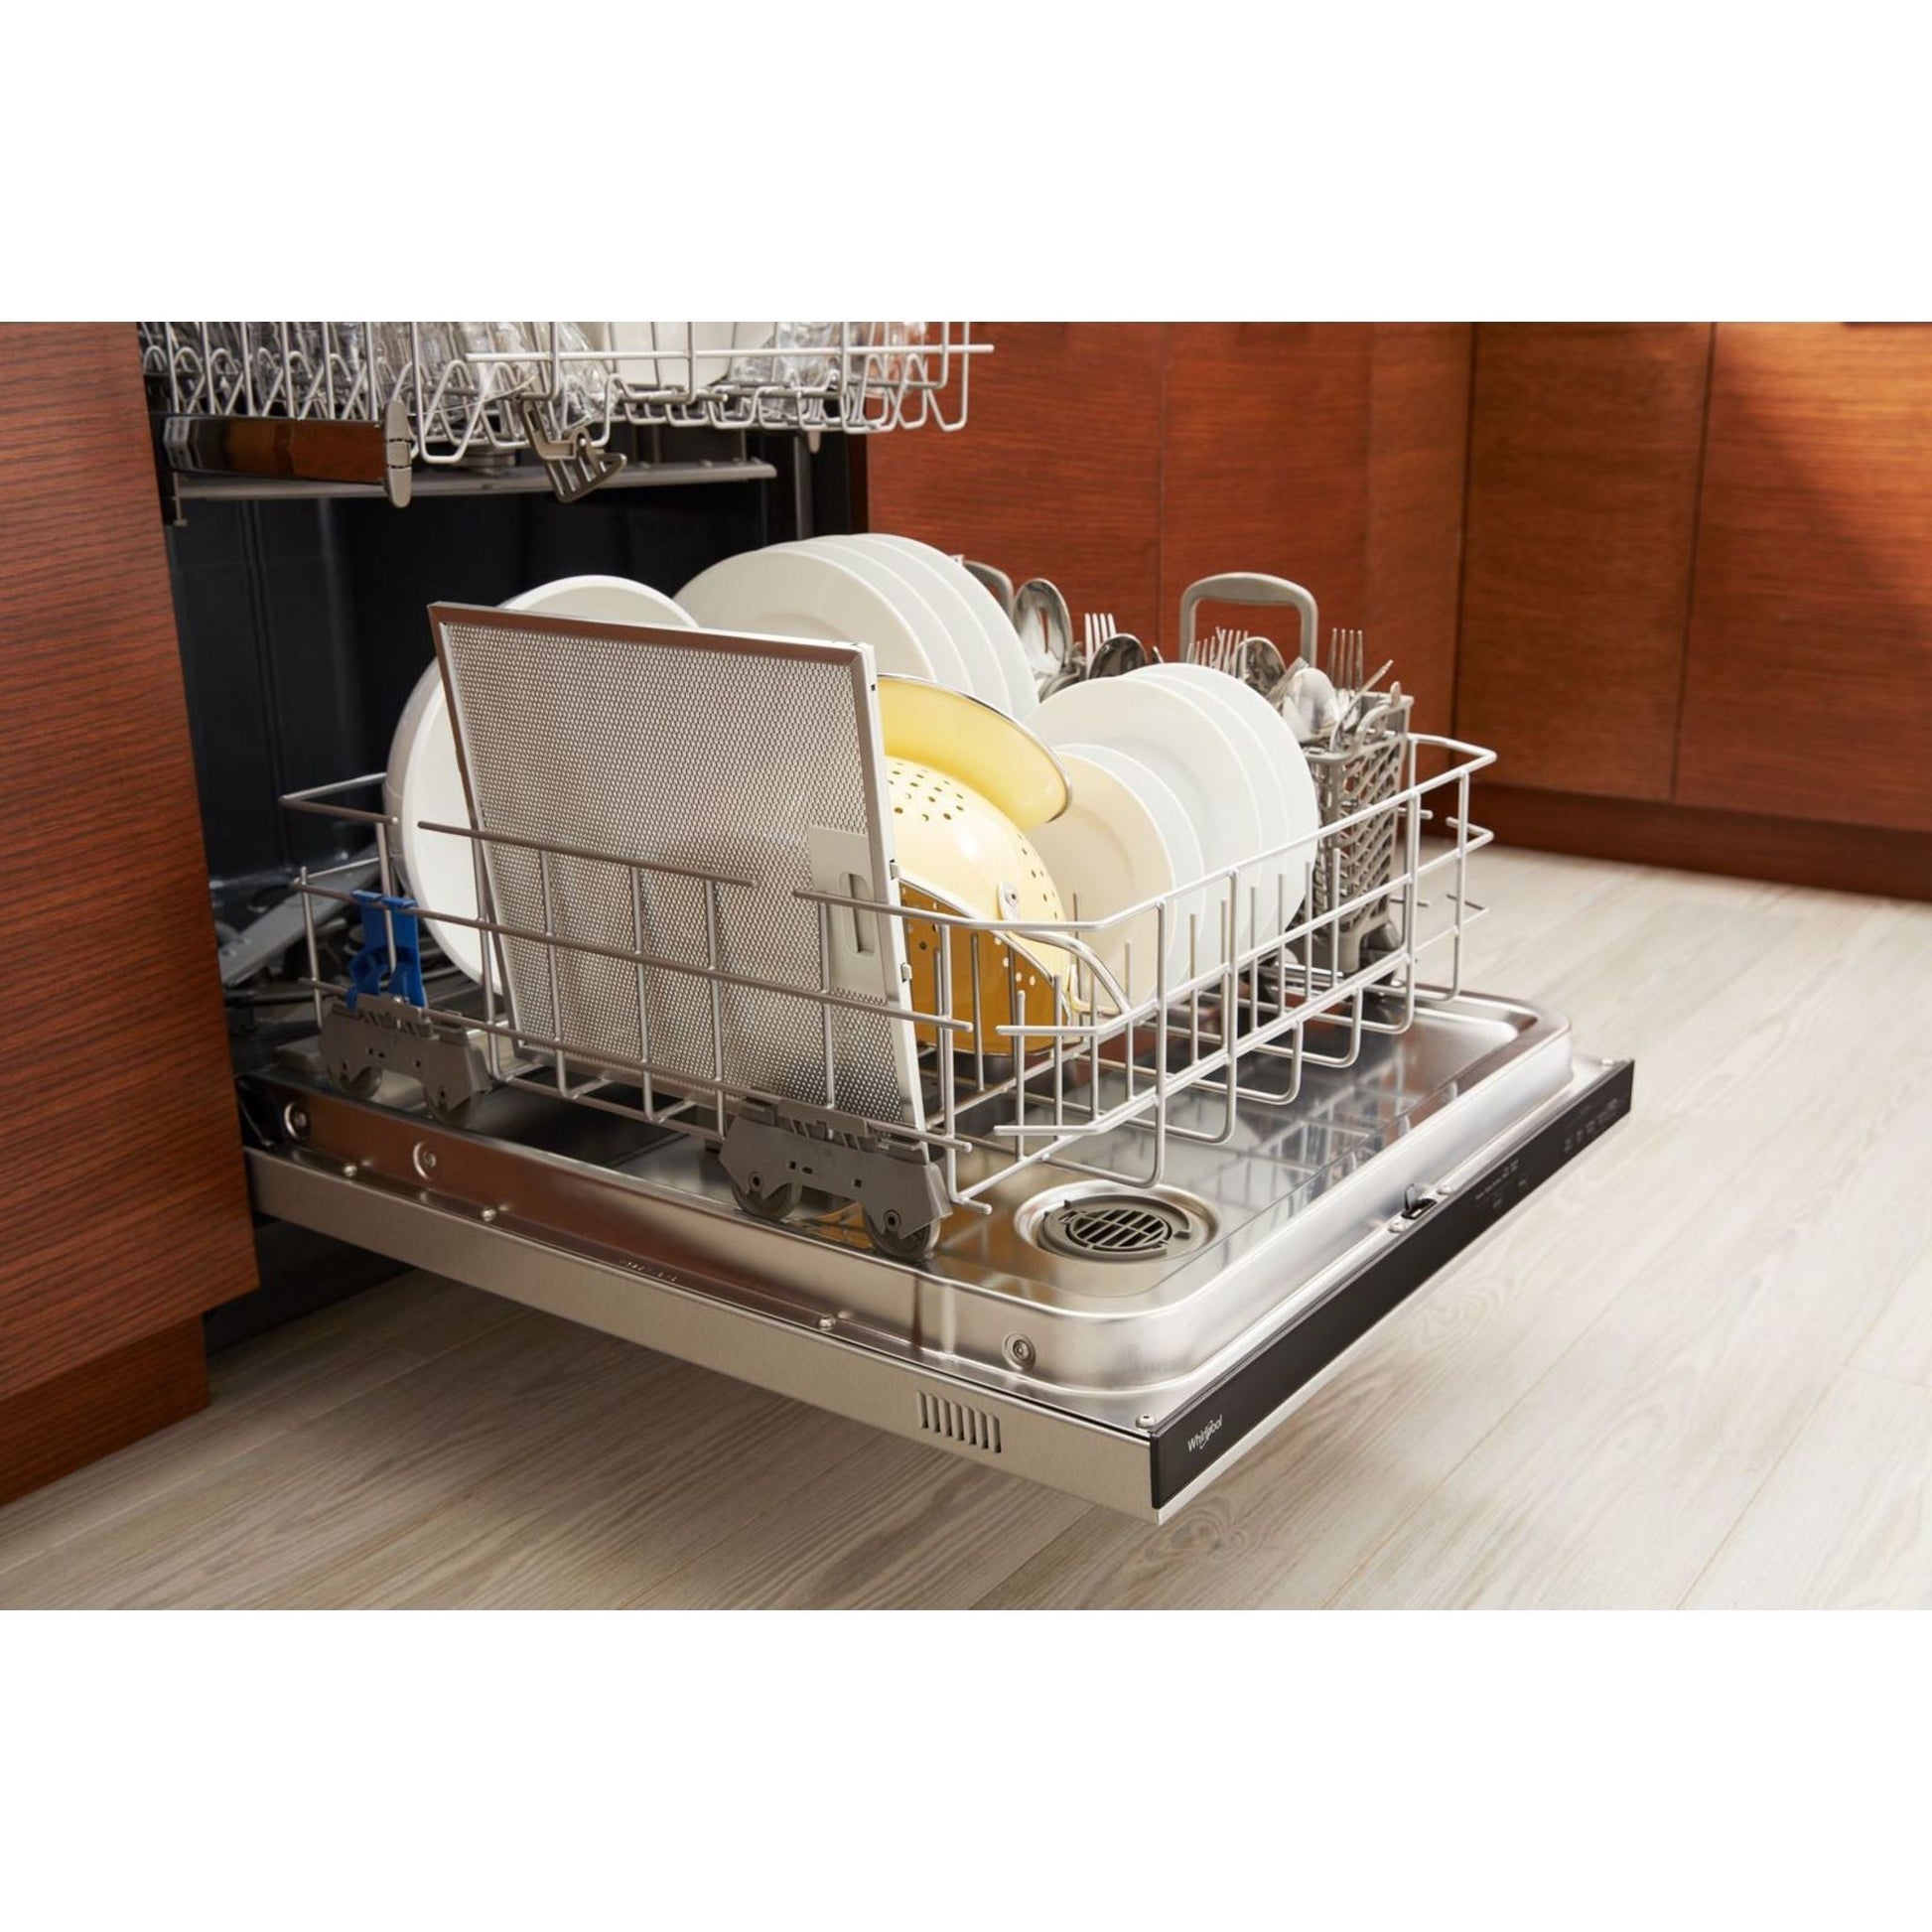 Whirlpool Dishwasher Plastic Tub (WDT730PAHZ) - Stainless Steel